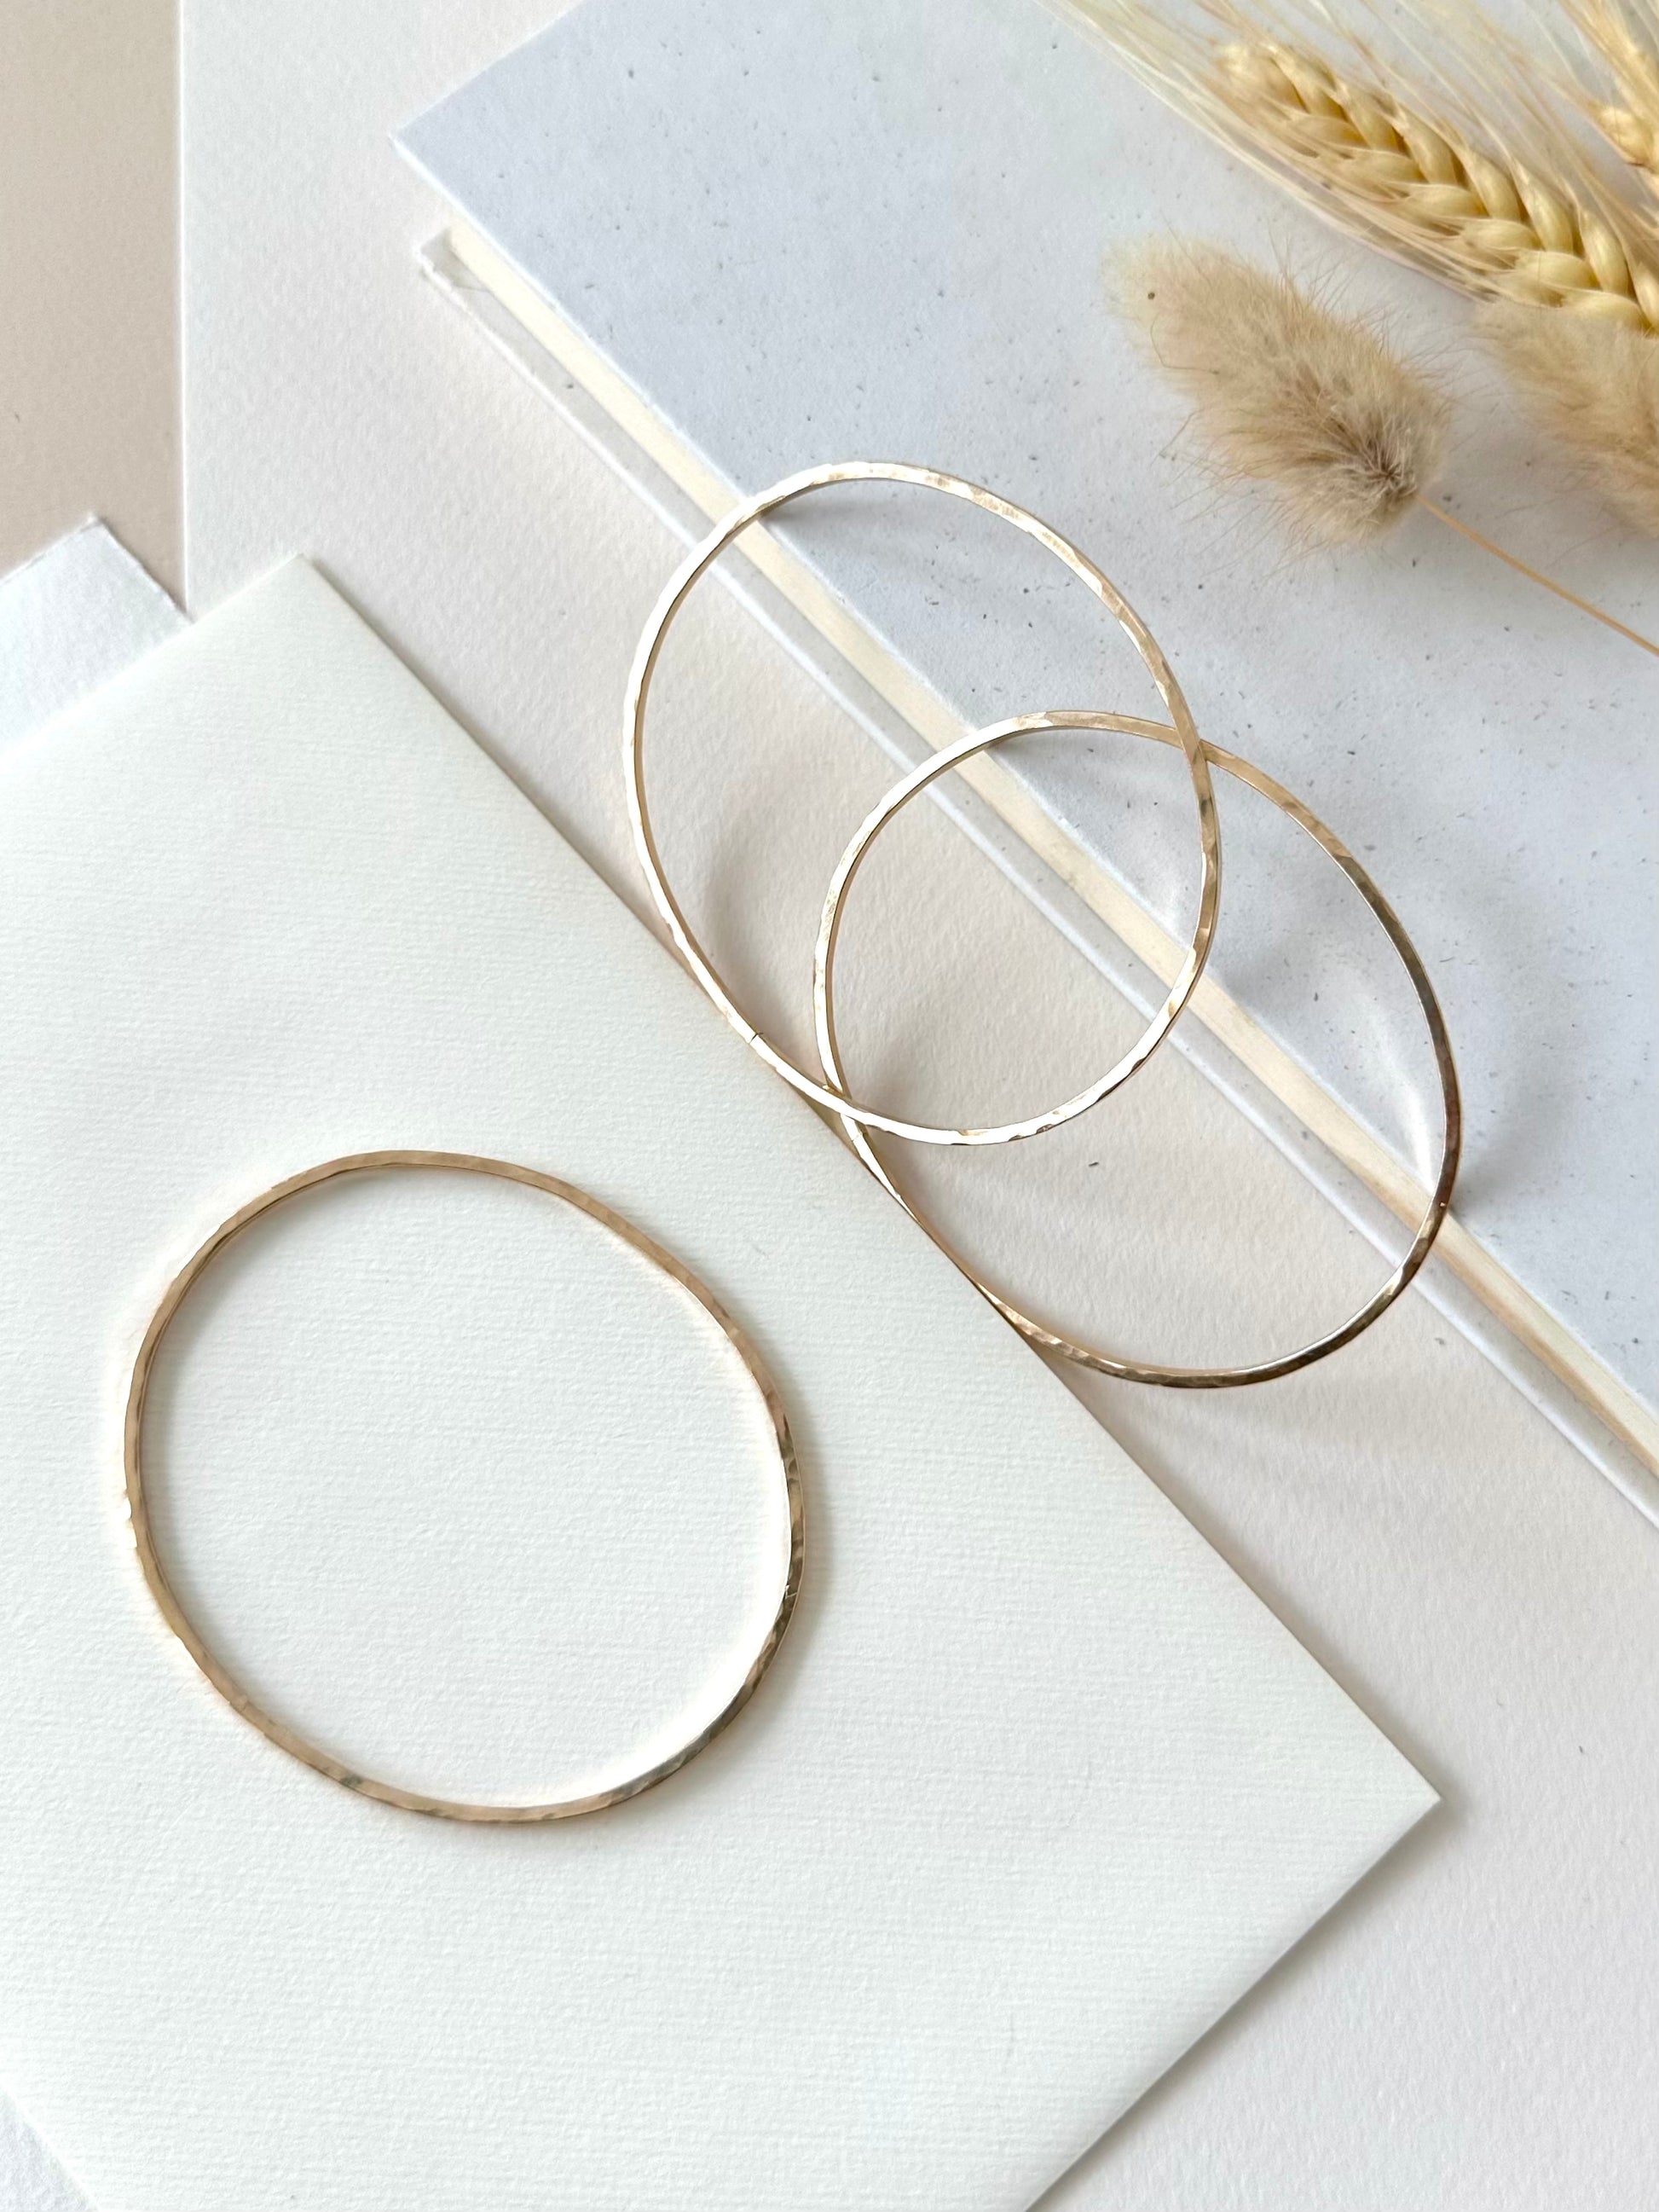 handmade hammered bangle bracelets, two displayed  leaning on a book and one laying flat on an ivory background with dried grasses 